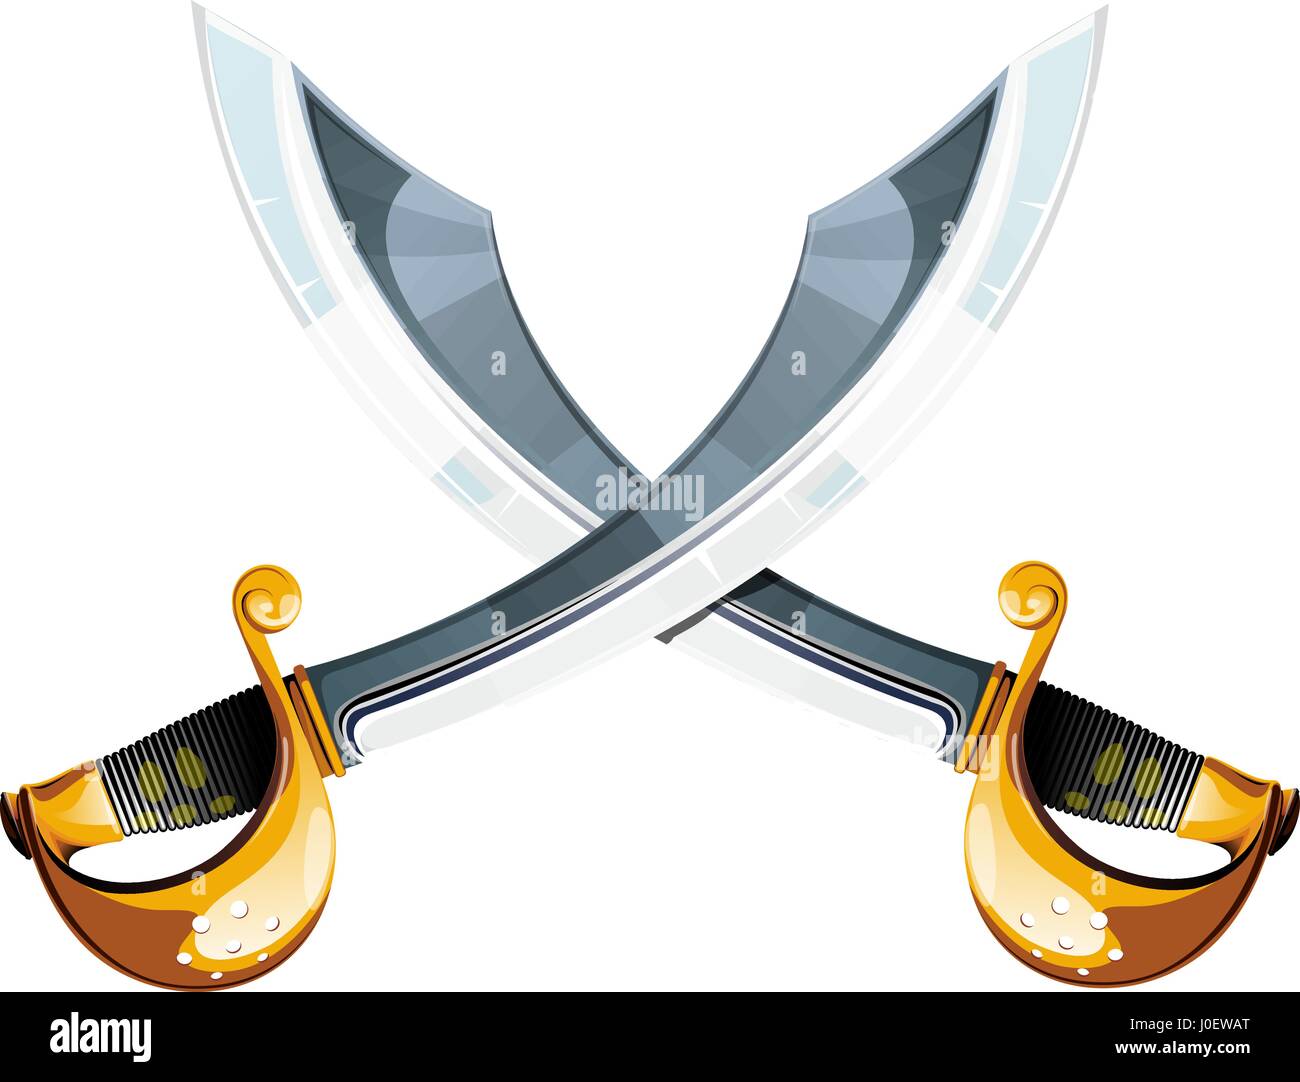 Pirate sword fight Stock Vector Images - Alamy